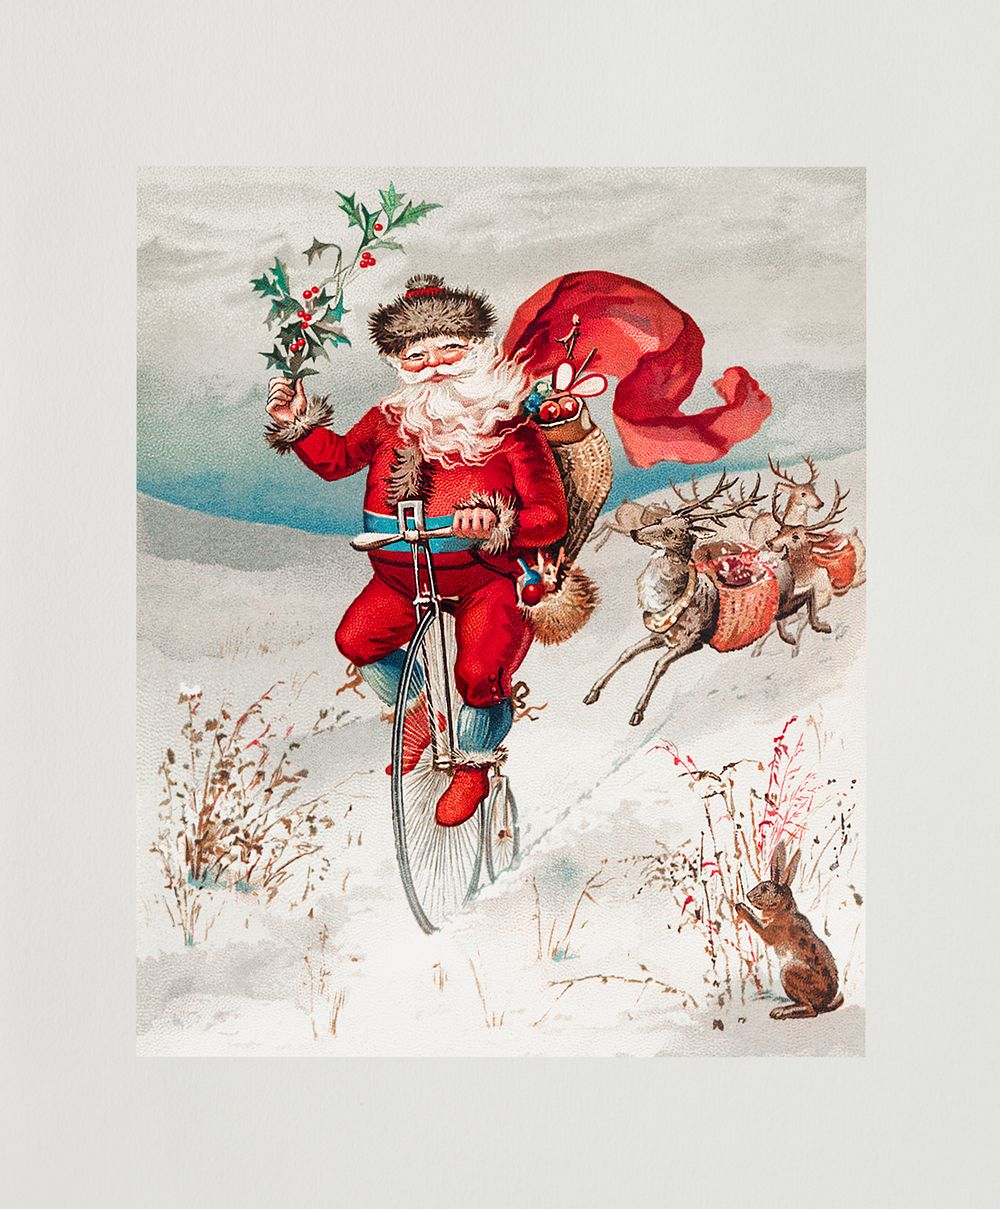 Santa Claus on a penny farthing with reindeer trailing and a rabbit from The Miriam And Ira D. Wallach Division Of Art…